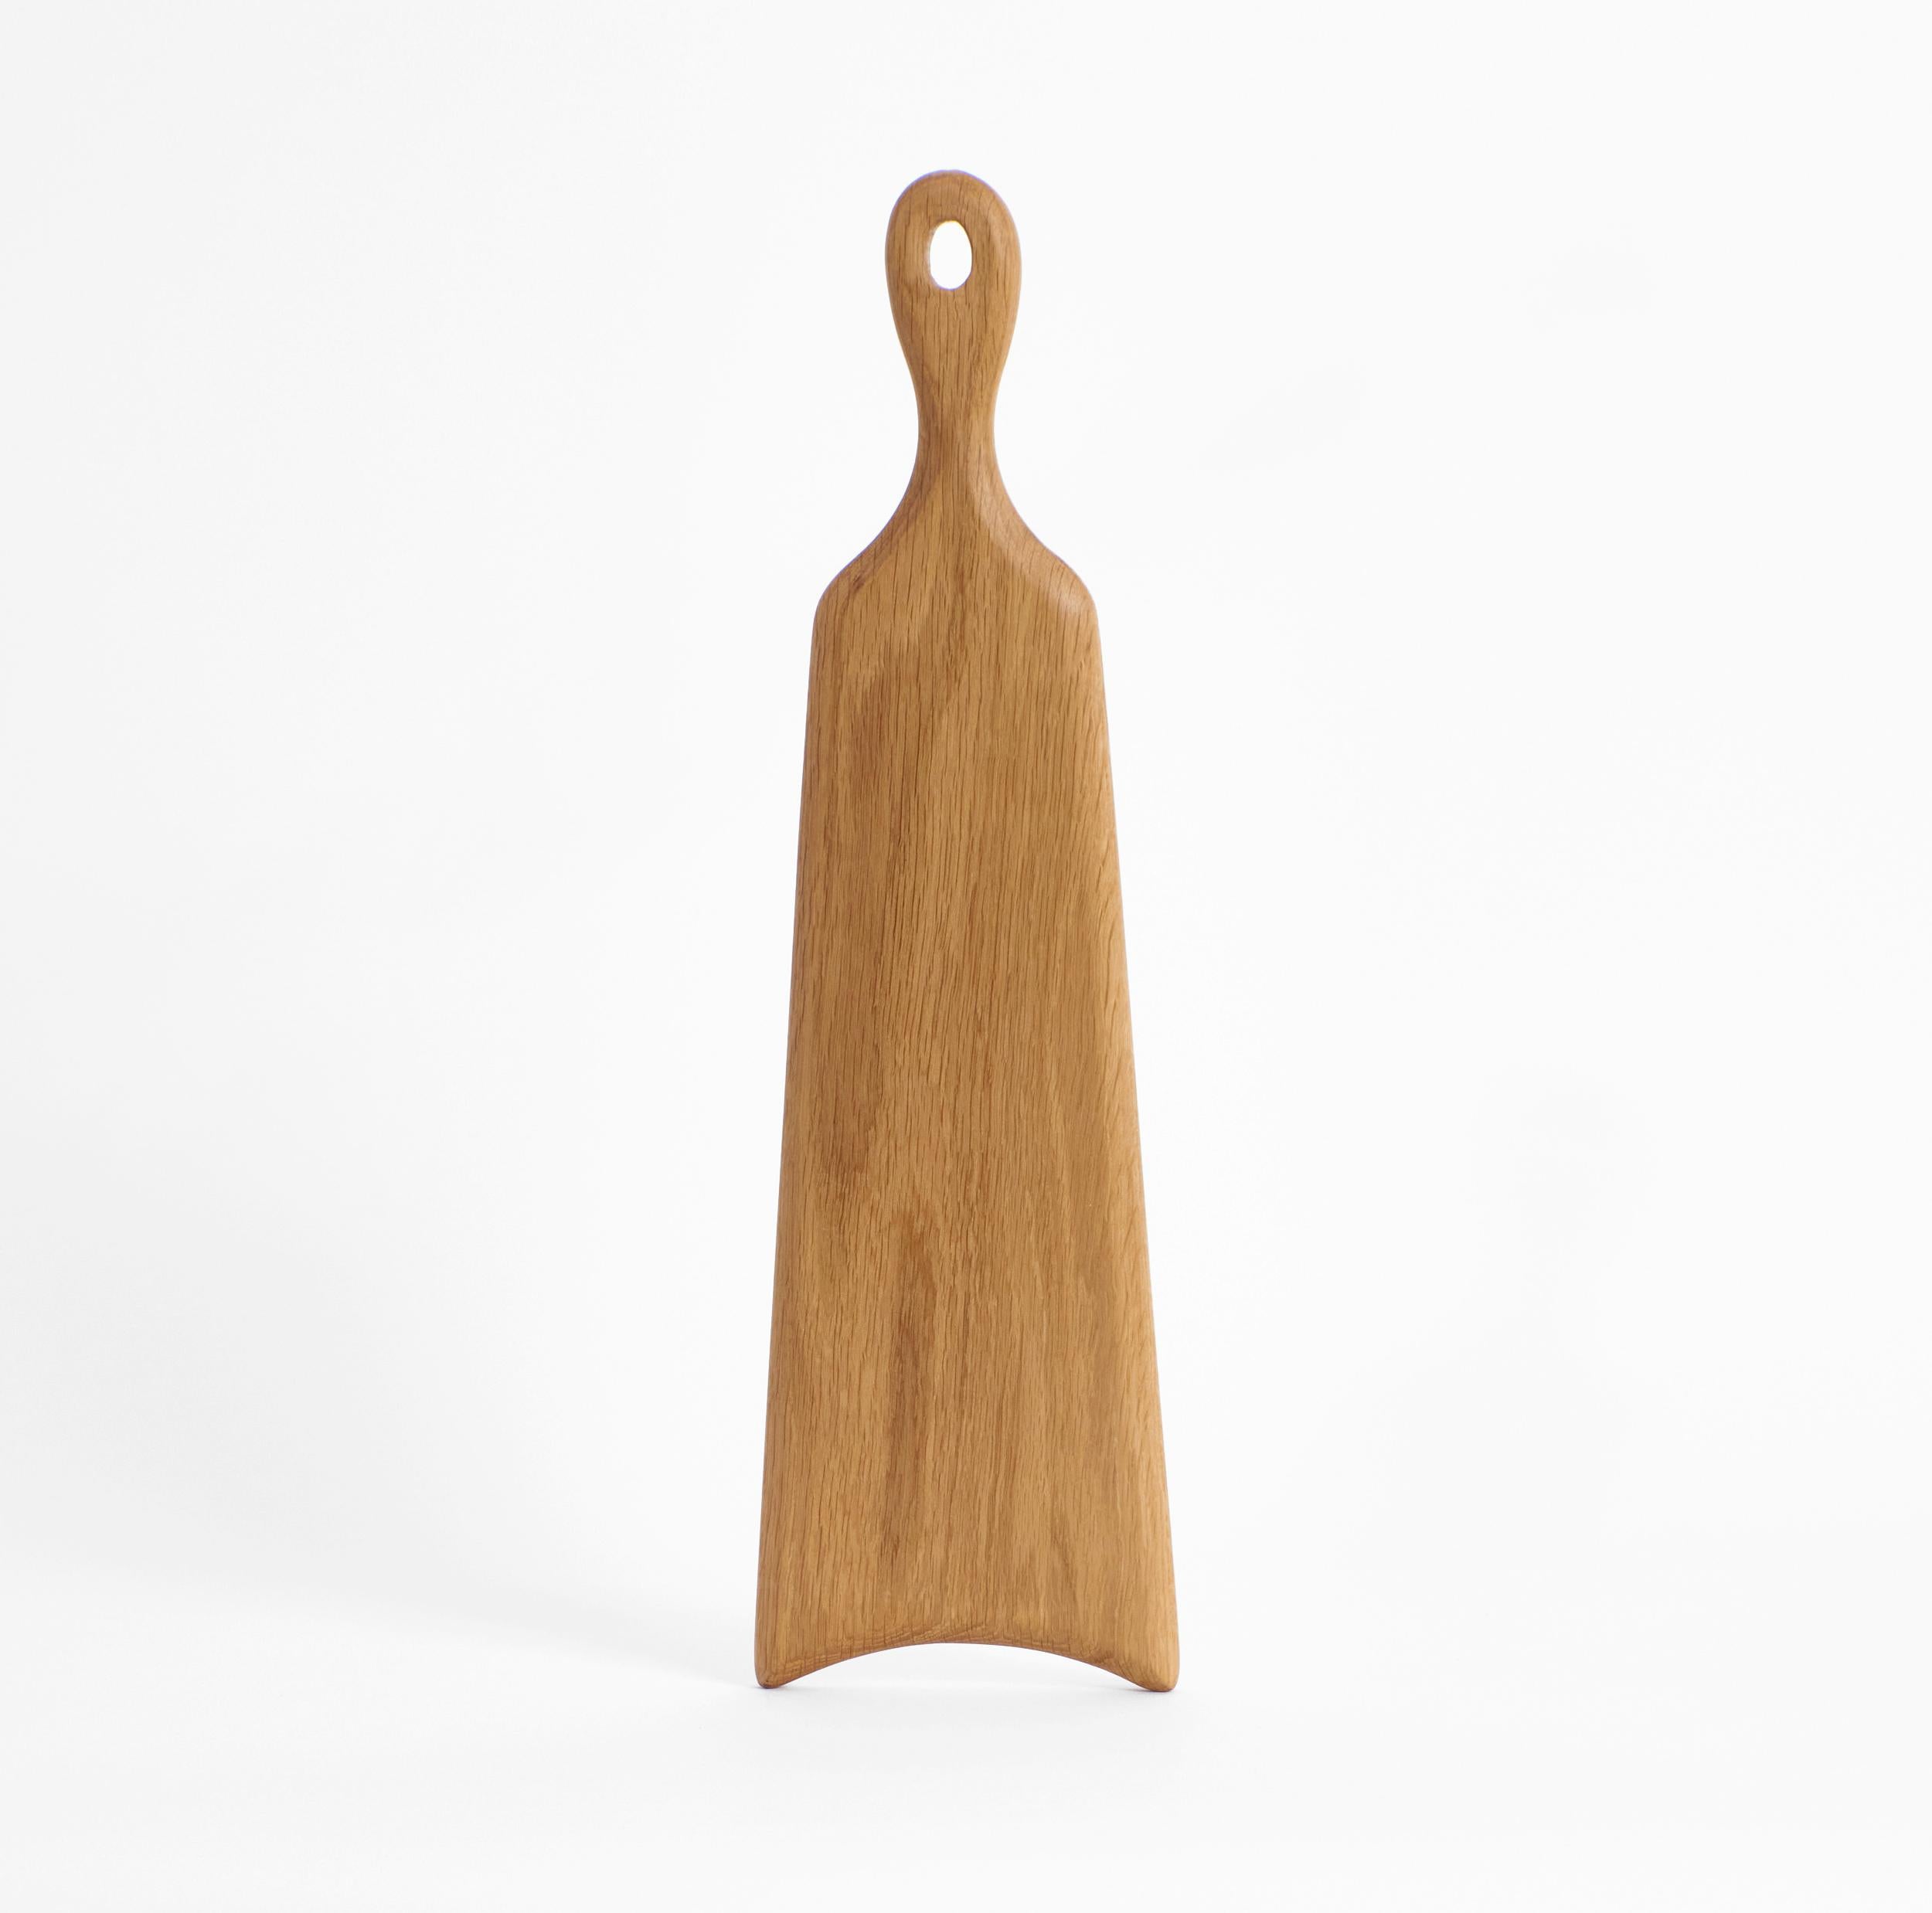 Set of 2 board 54 in Oak by Project 213A
Dimensions: D 54.5 x W 15 x H 2 cm
Materials: Oak wood.

This long shaped board is hand-carved from oak. The boards as an individual or as part of the family will become a key item in every kitchen being